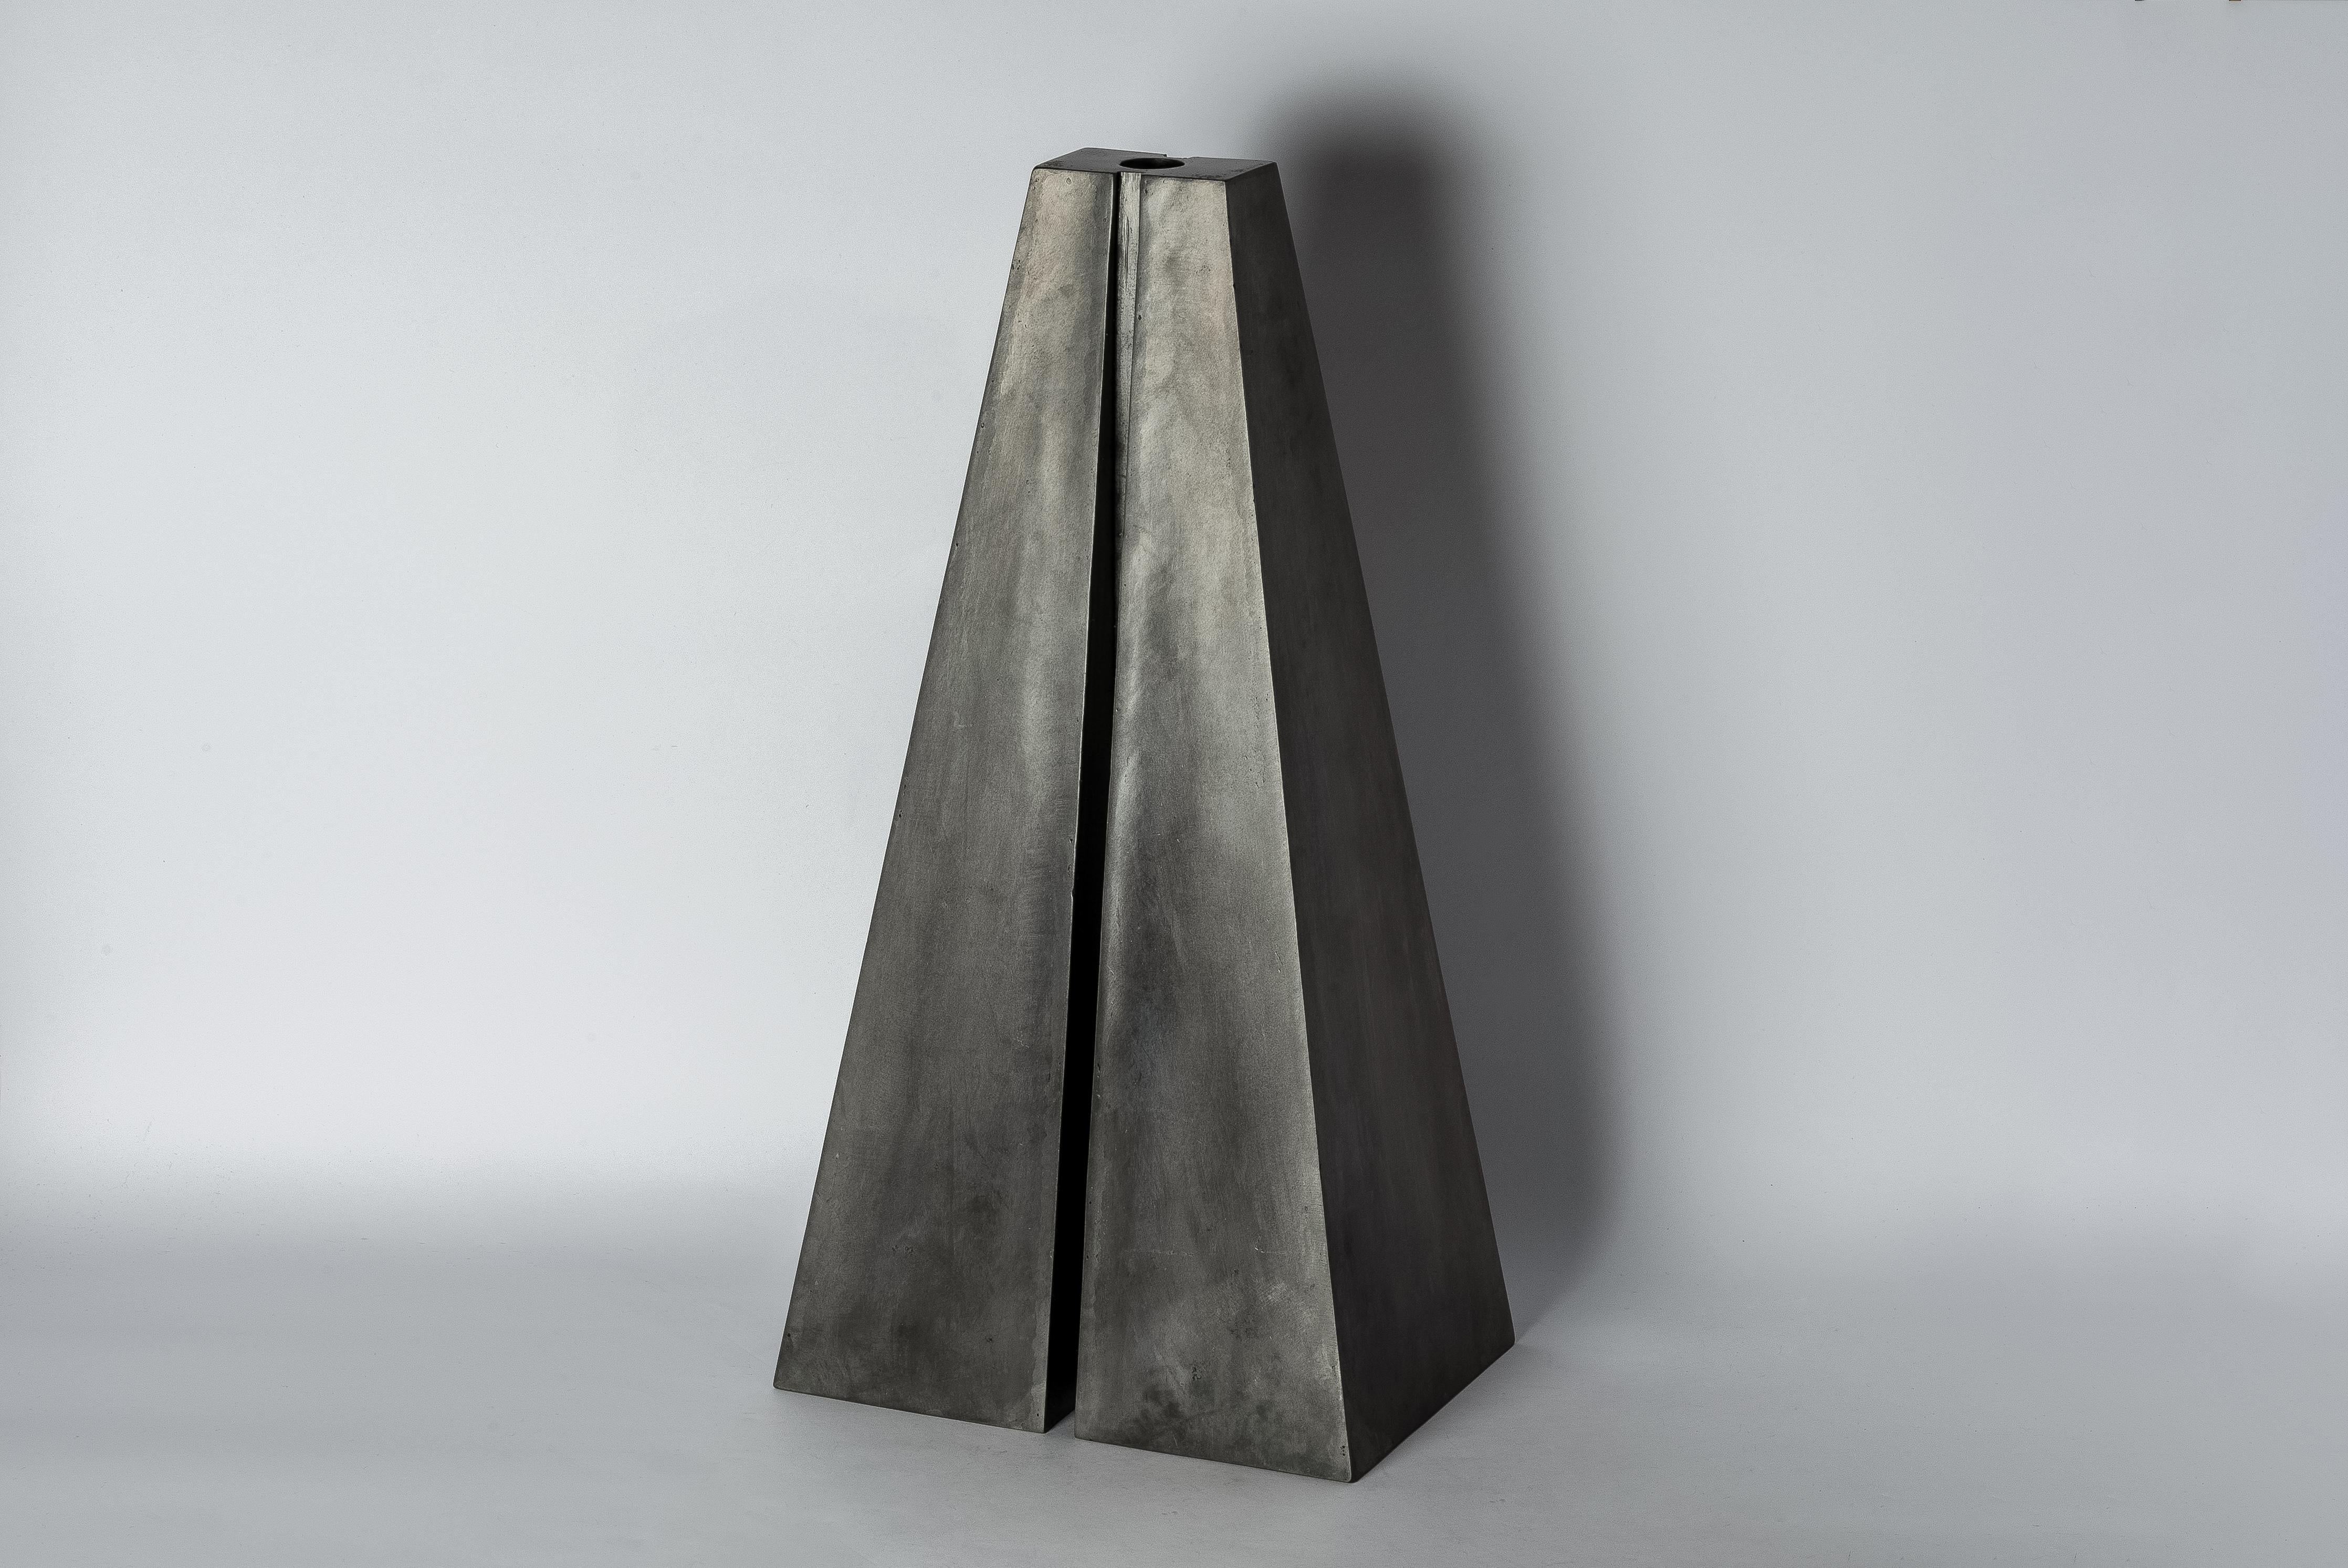 Candle Tower in iron with acid oxidation. This piece is 100% hand fabricated from metal plate; cut into sections and soldered together to make the hollow three dimensional form. It's more than just a candle holder; it's a captivating work of art